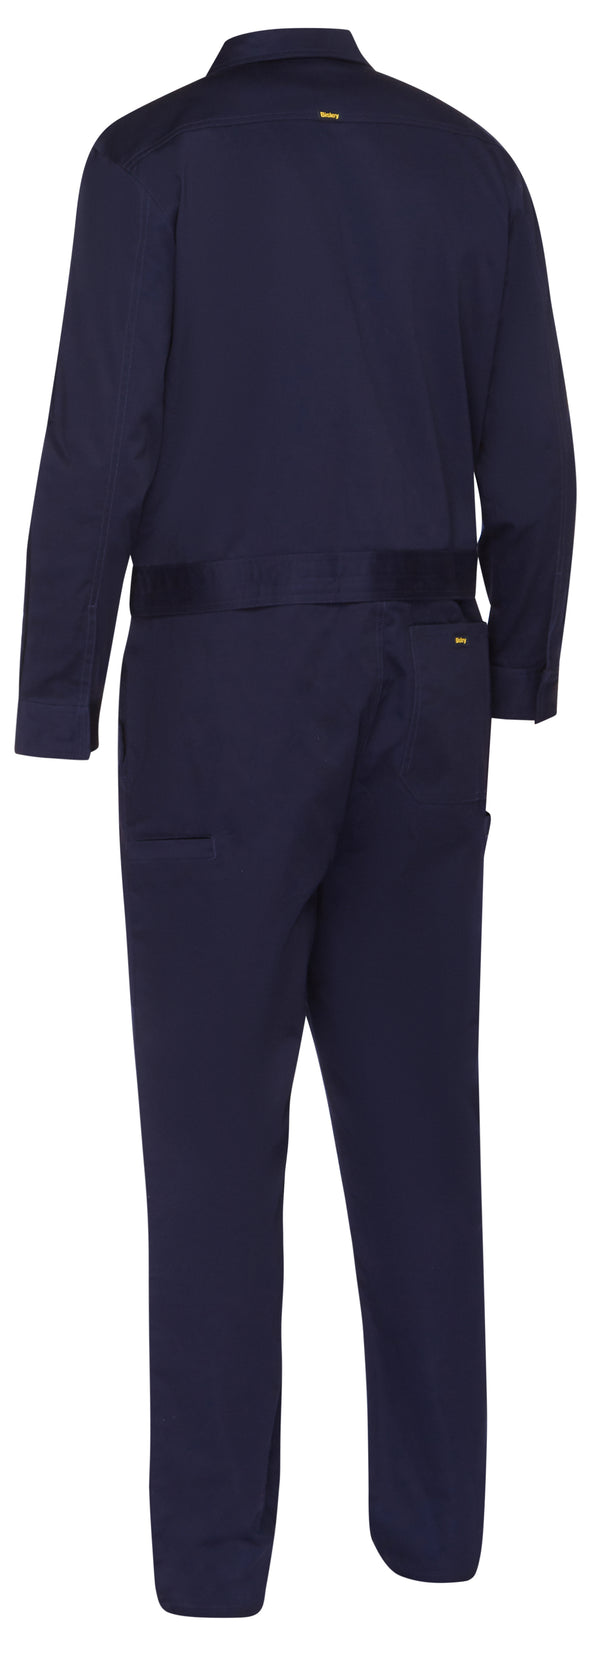 Work Coverall With Waist Zip Opening (Stout)